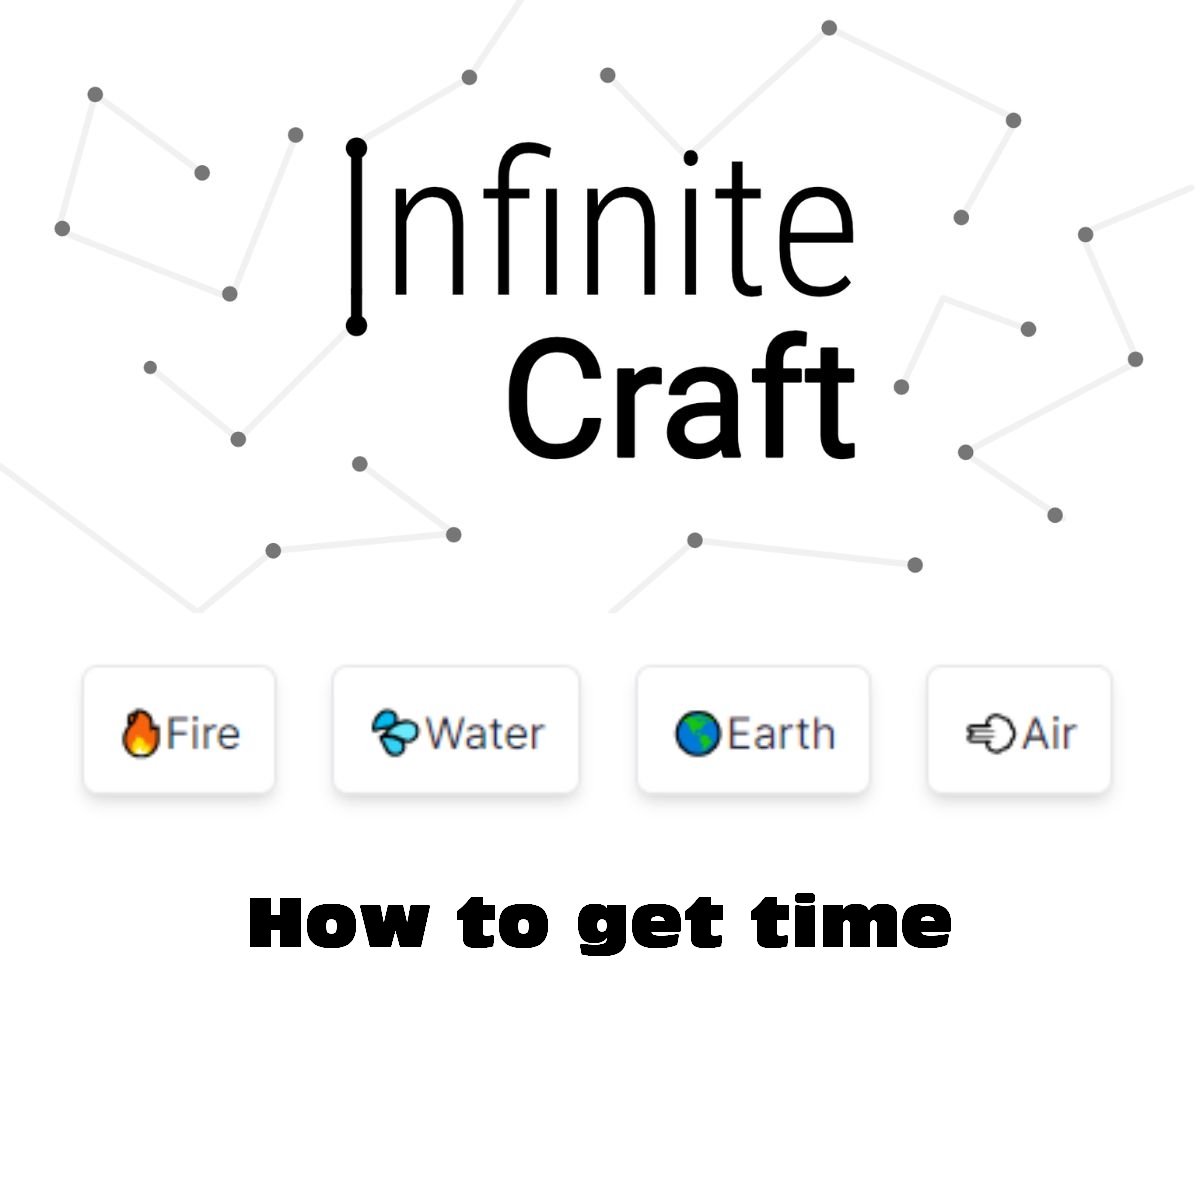 how to get time in infinite craft